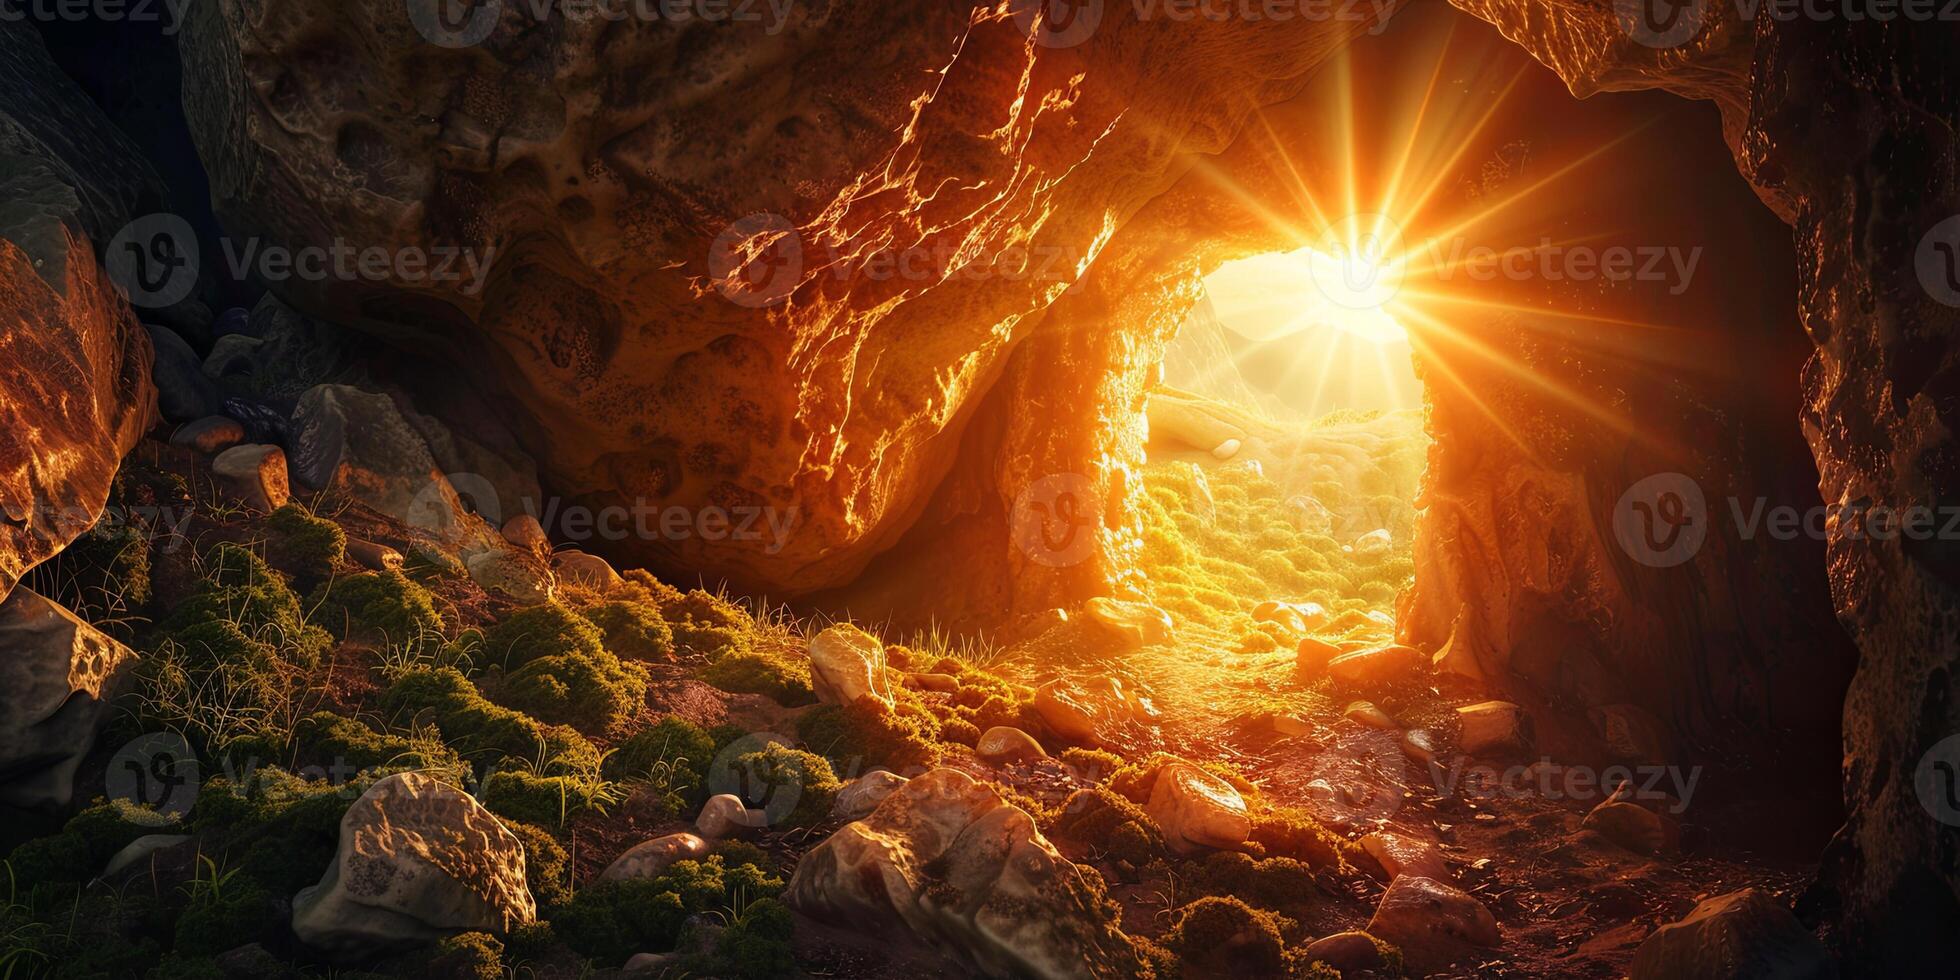 stone rocky empty cave tomb and light rays easter photo